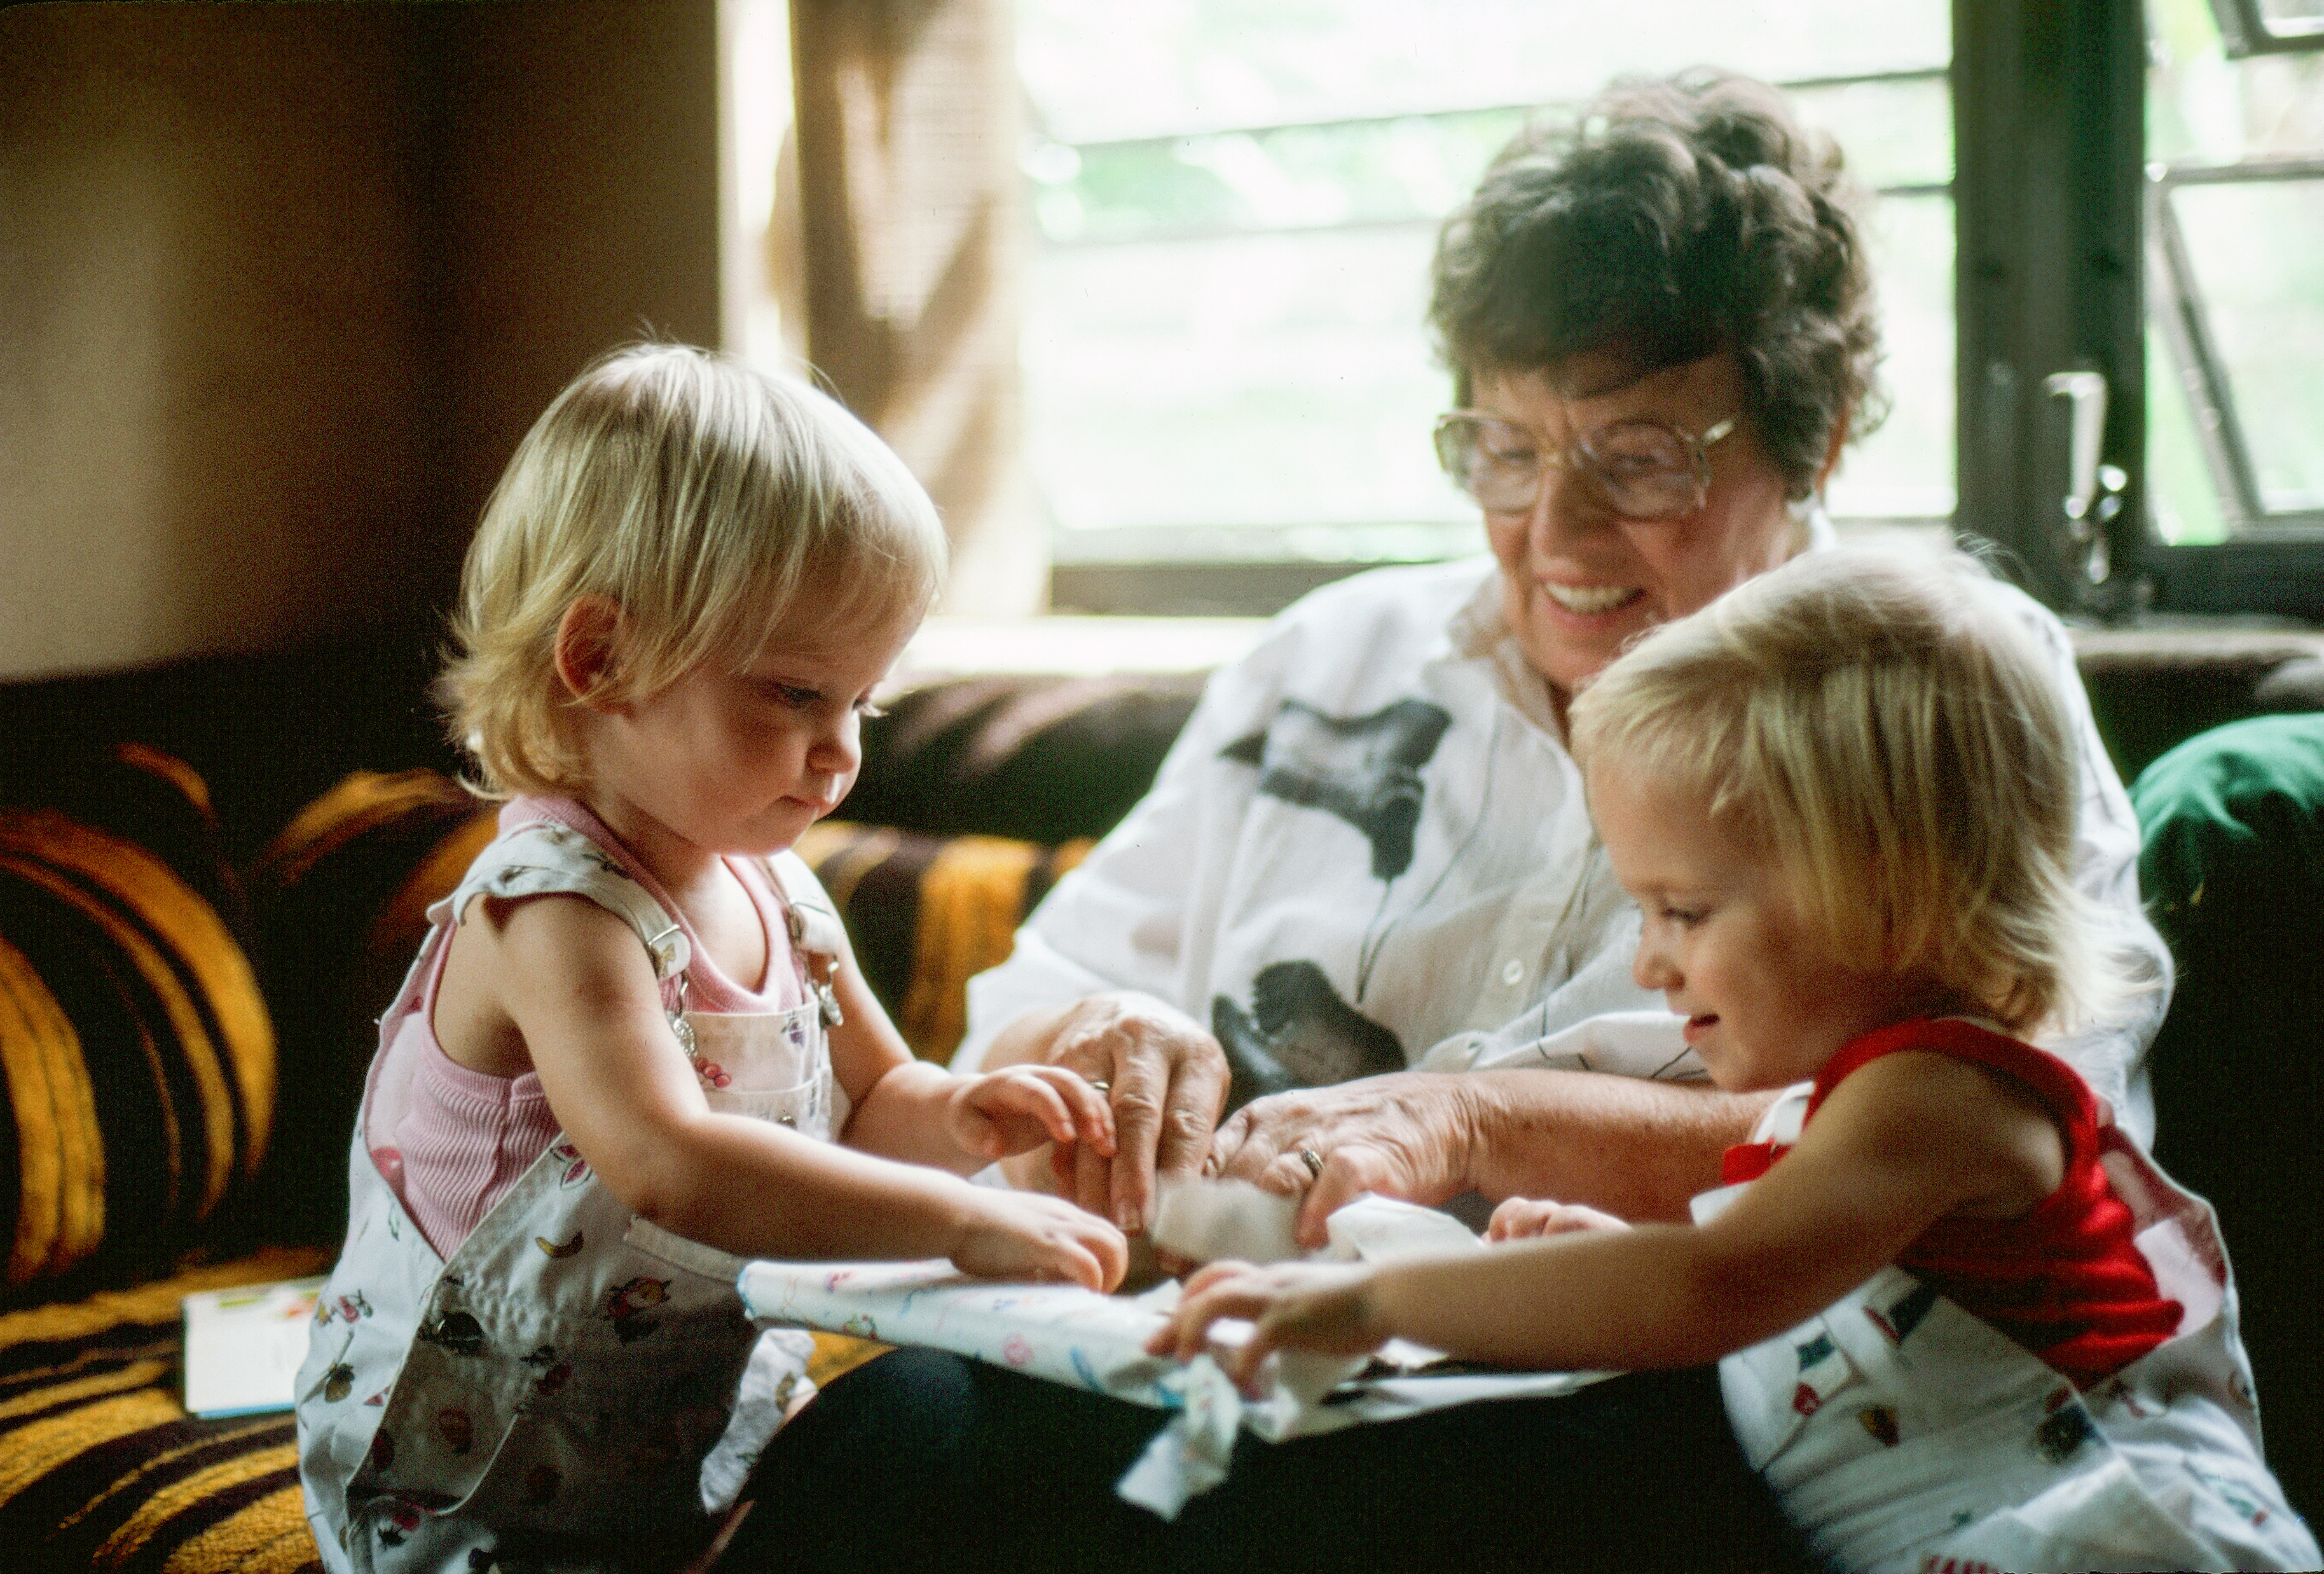 Grandmother with glasses sits with two young children who are playing with a toy